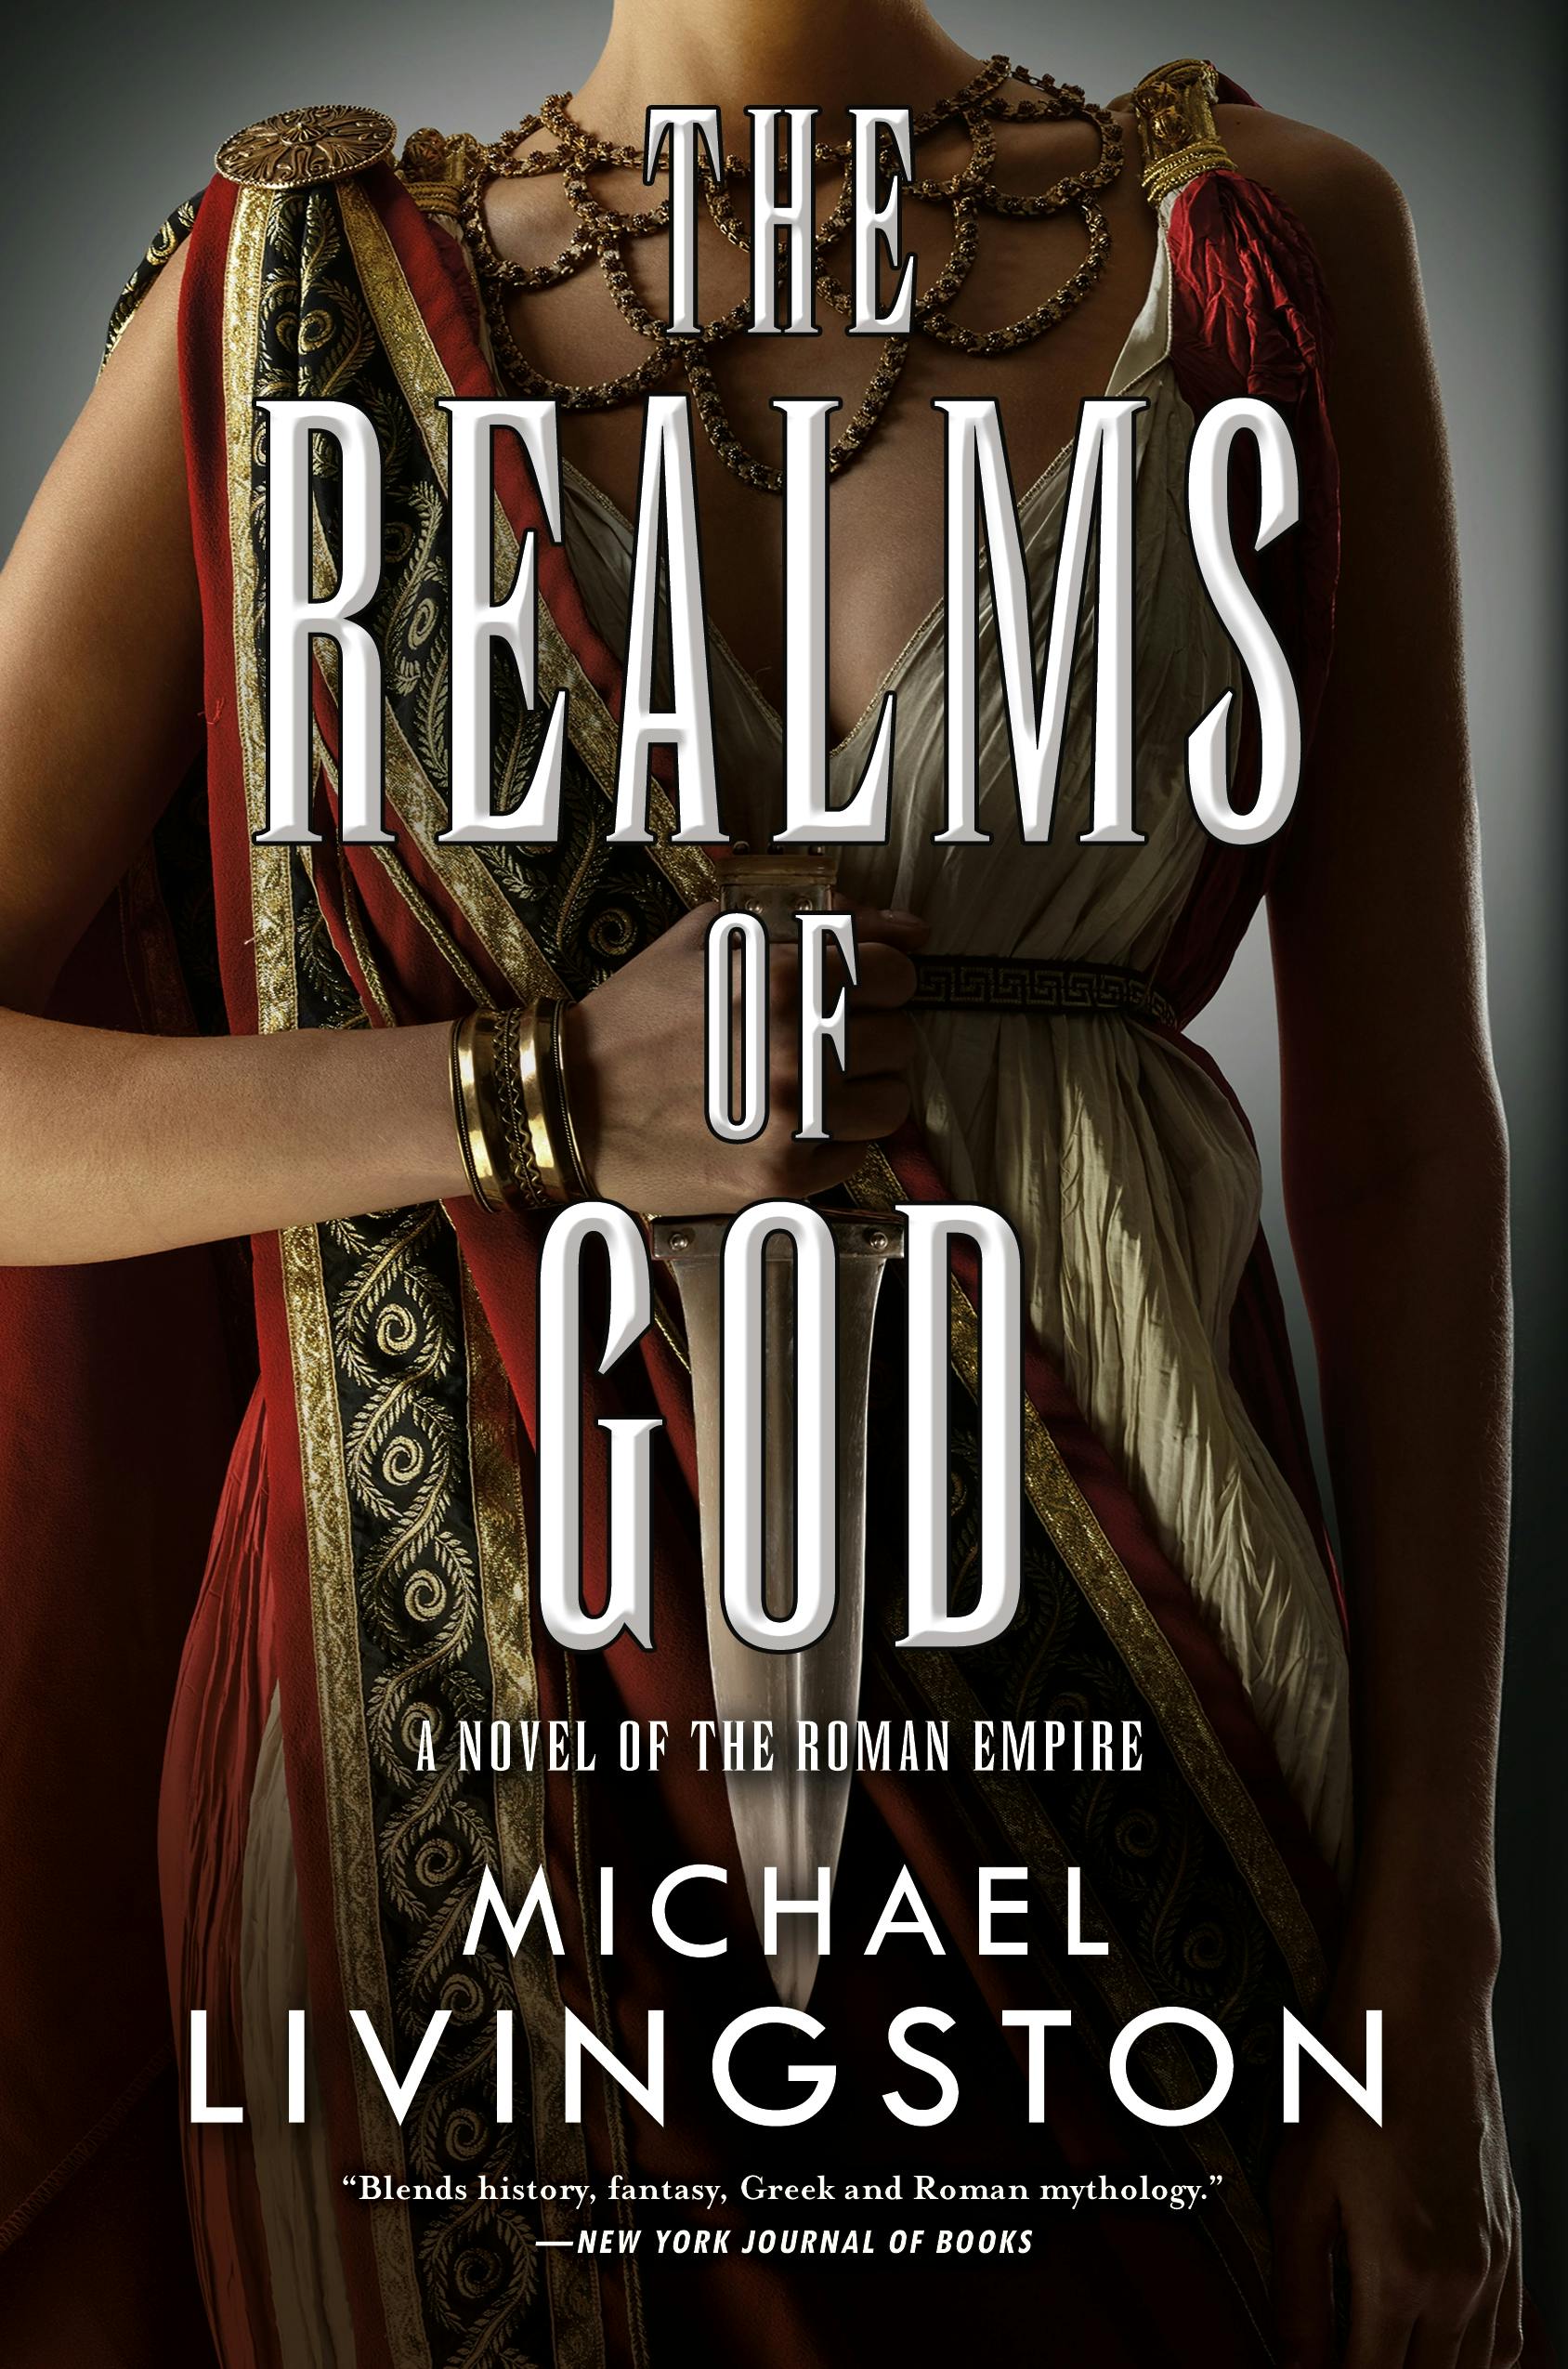 Cover for the book titled as: The Realms of God